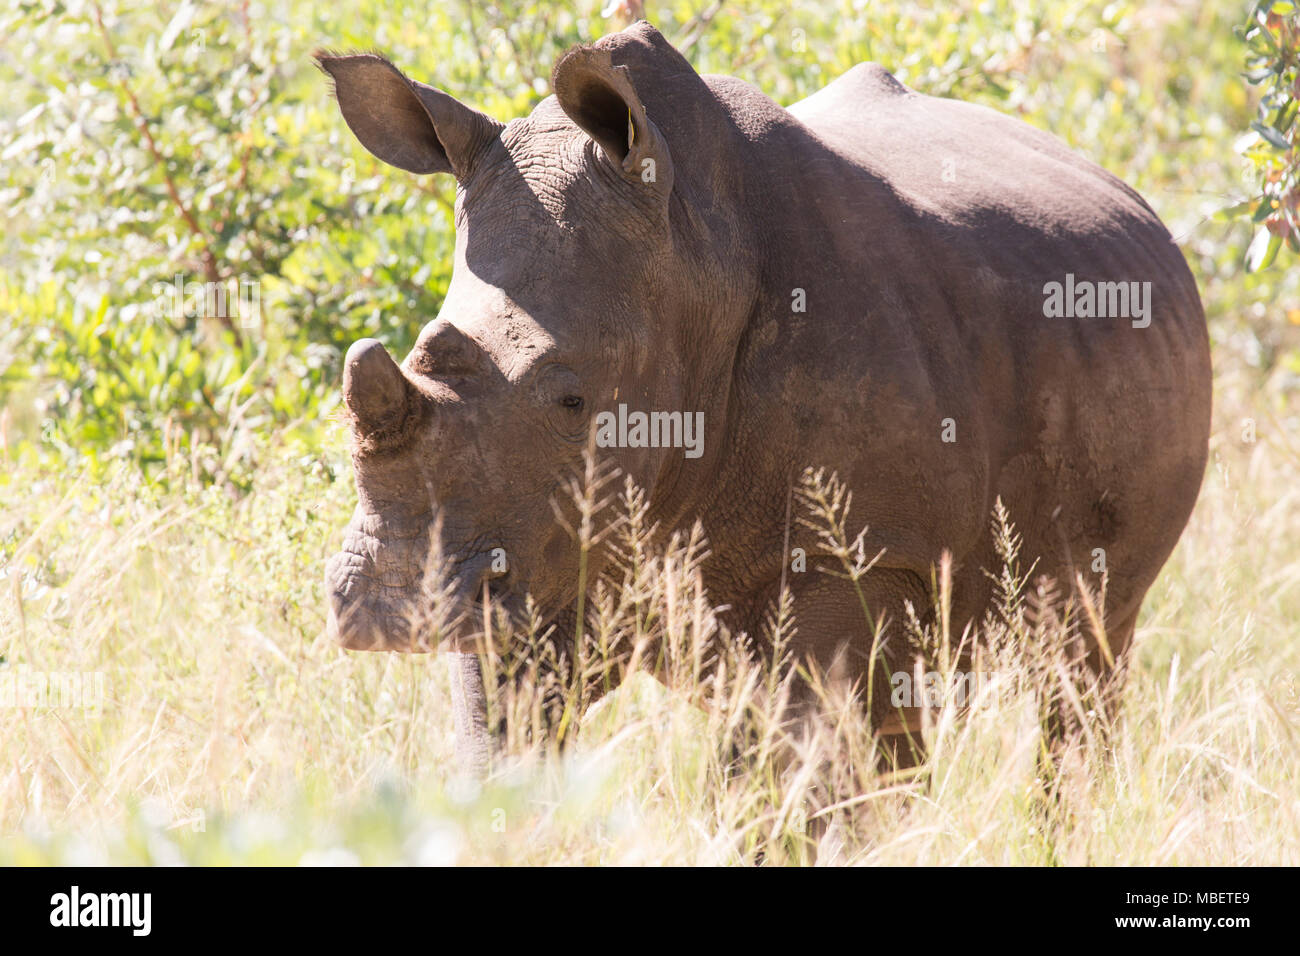 A tagged white rhino (Ceratotherium simum) in Matobo National Park, Zimbabwe. The horned creature is also known as the square-lipped rhinoceros. Stock Photo